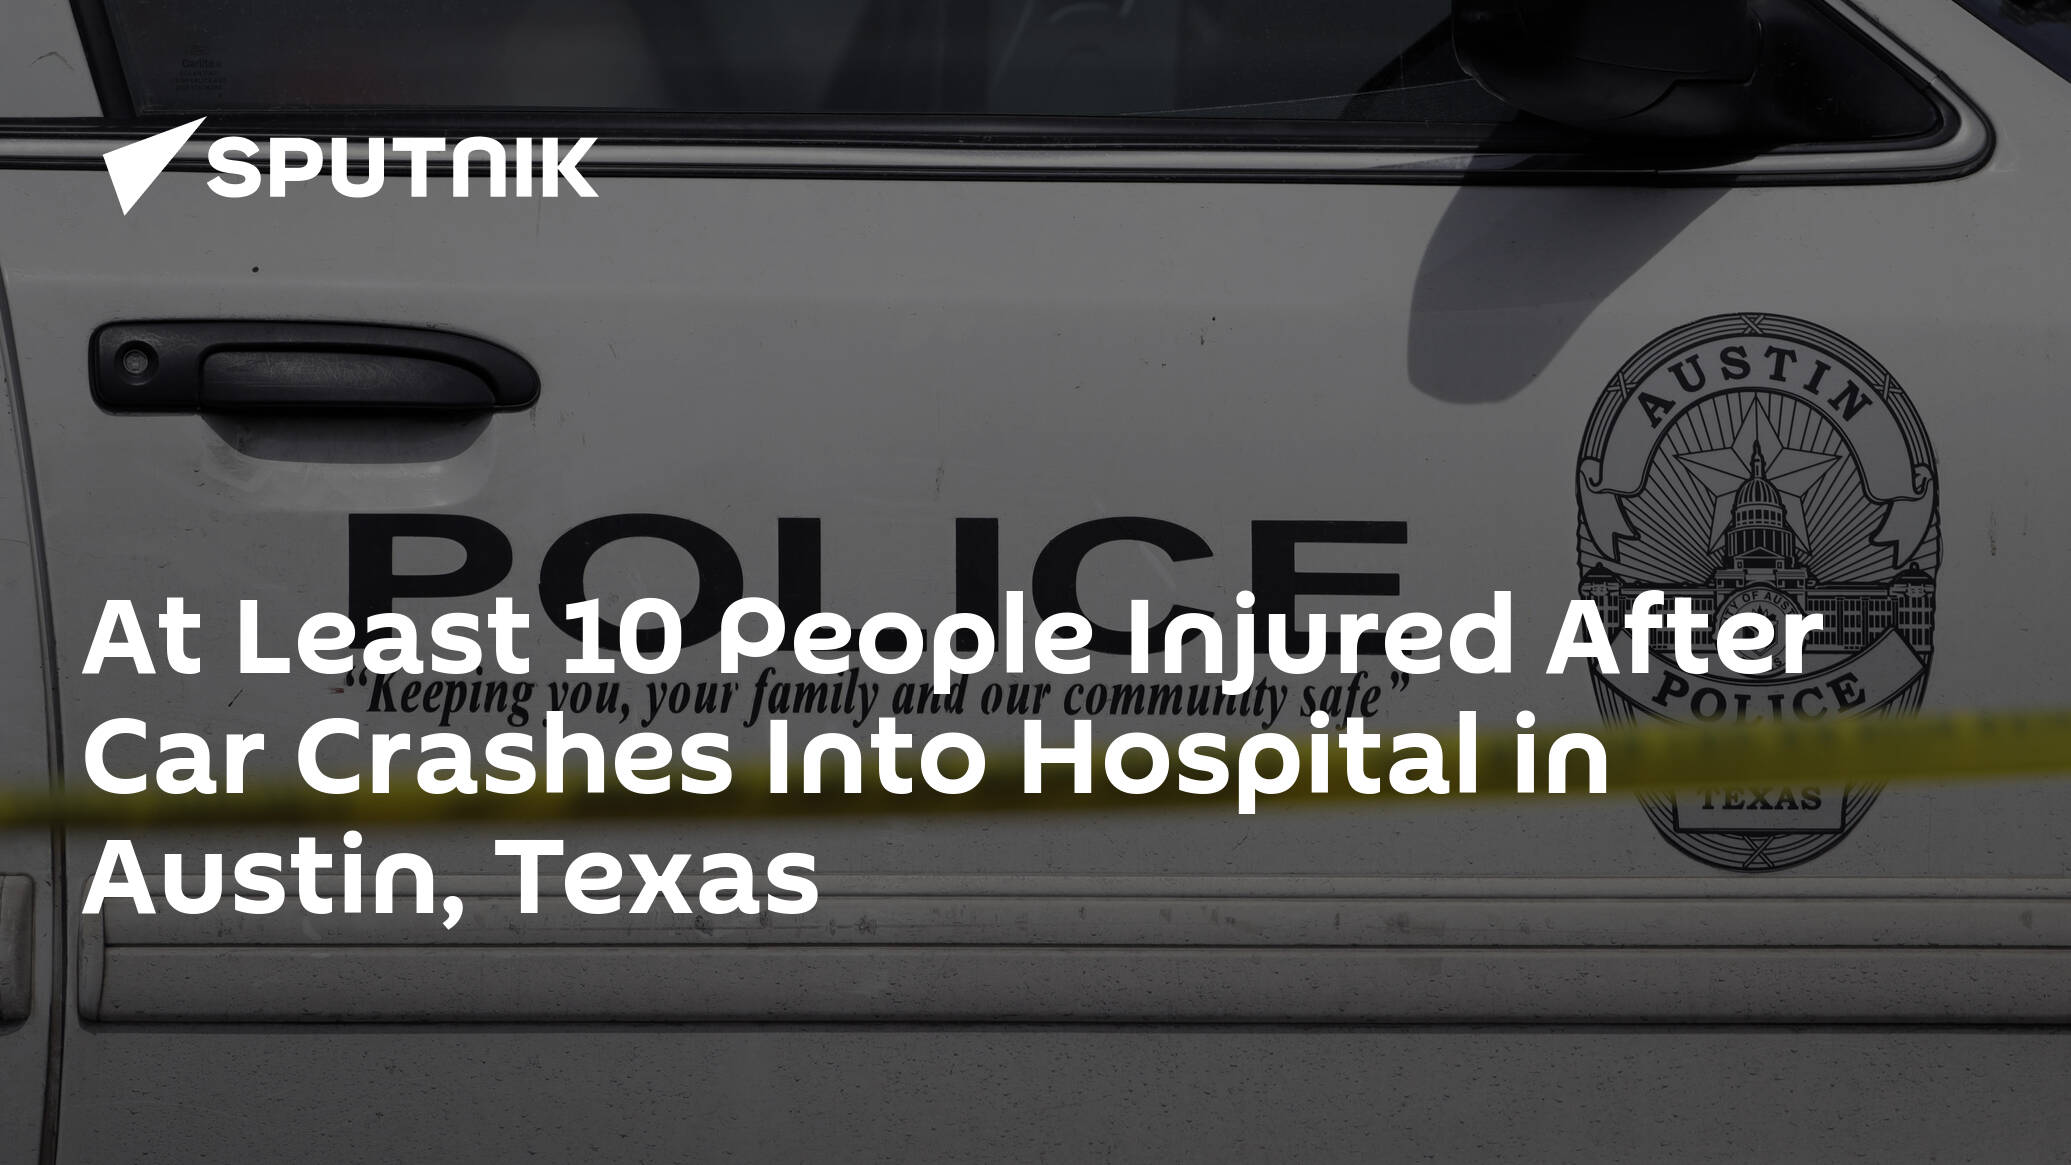 At Least 10 People Injured After Car Crashes Into Hospital in Austin, Texas